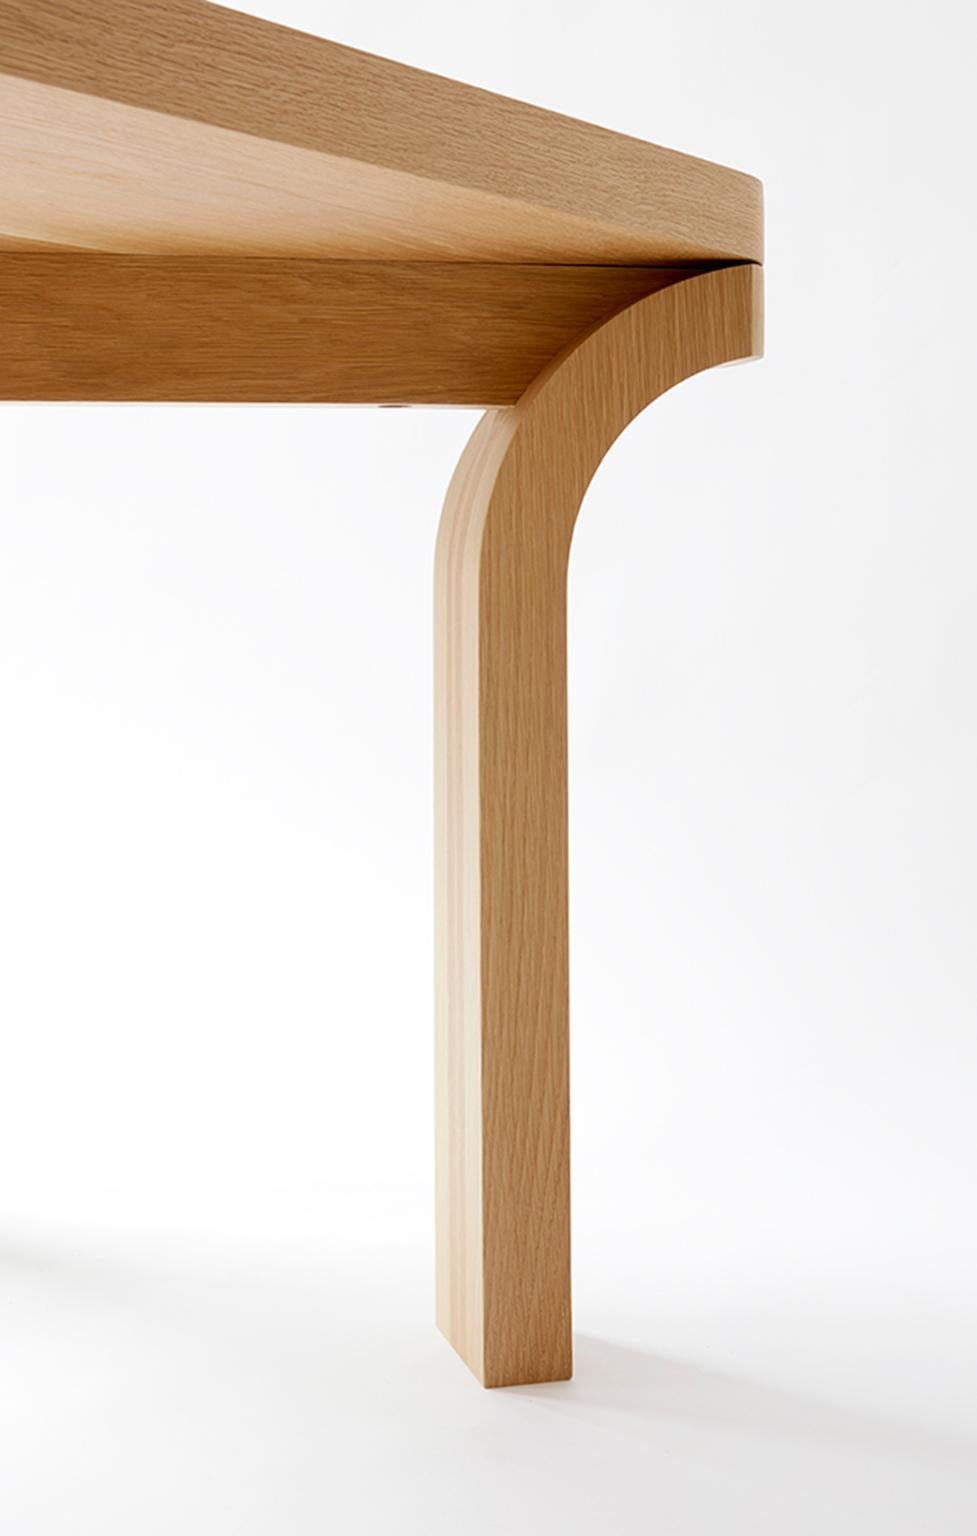 The Relevé dining table was conceived from the outside corners
in, inspired by a ballet dancer's pointed stance, sturdily poised and
arched outward. The piece is constructed out of solid white oak.
The angled stretchers, bisecting the 